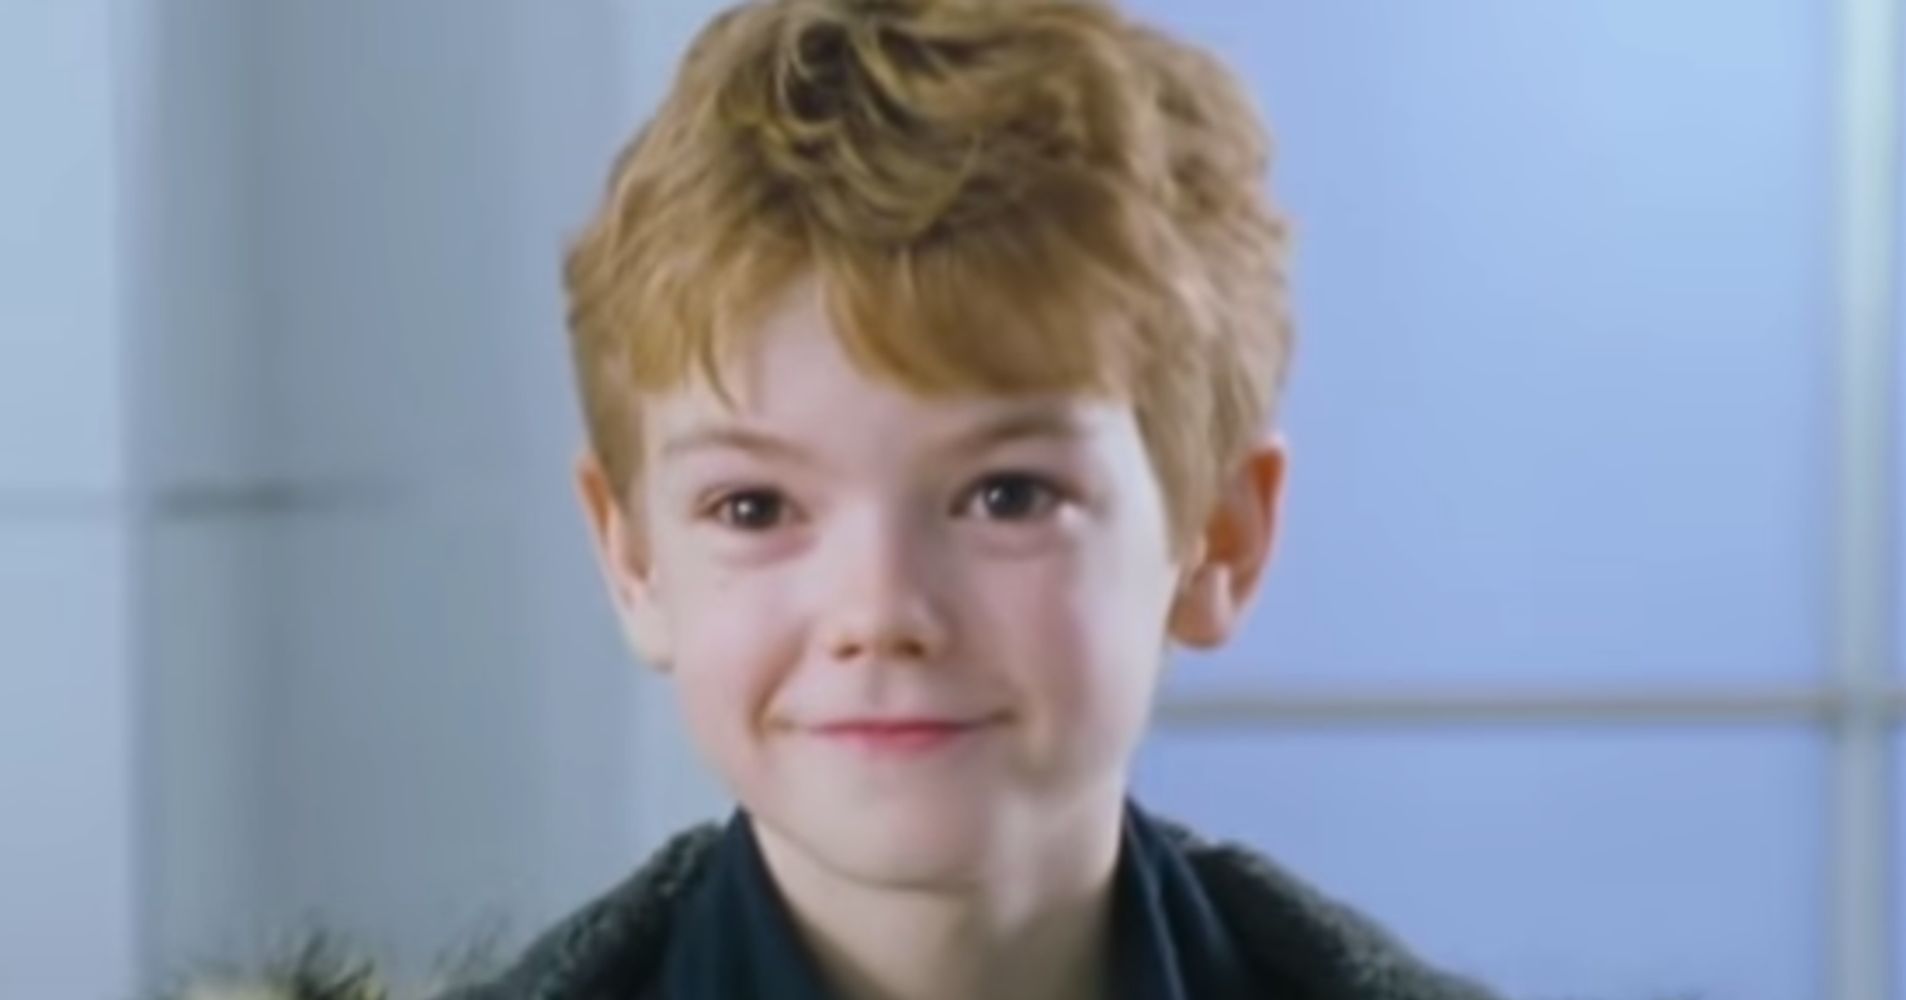 The Little Boy From 'Love Actually' Has Not Changed At All | HuffPost